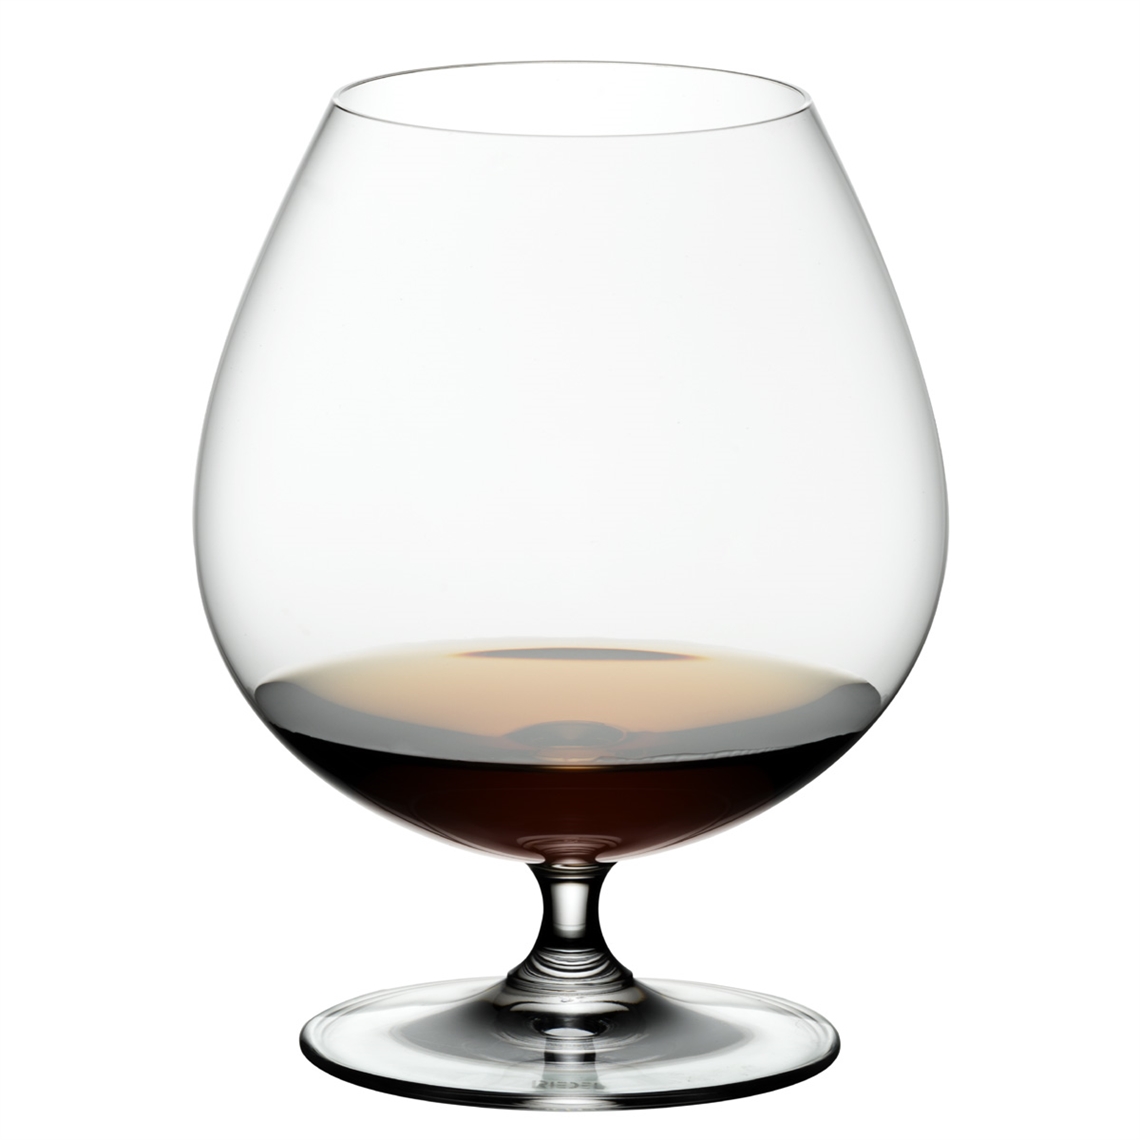 View more riedel vinum from our Spirit Glasses range